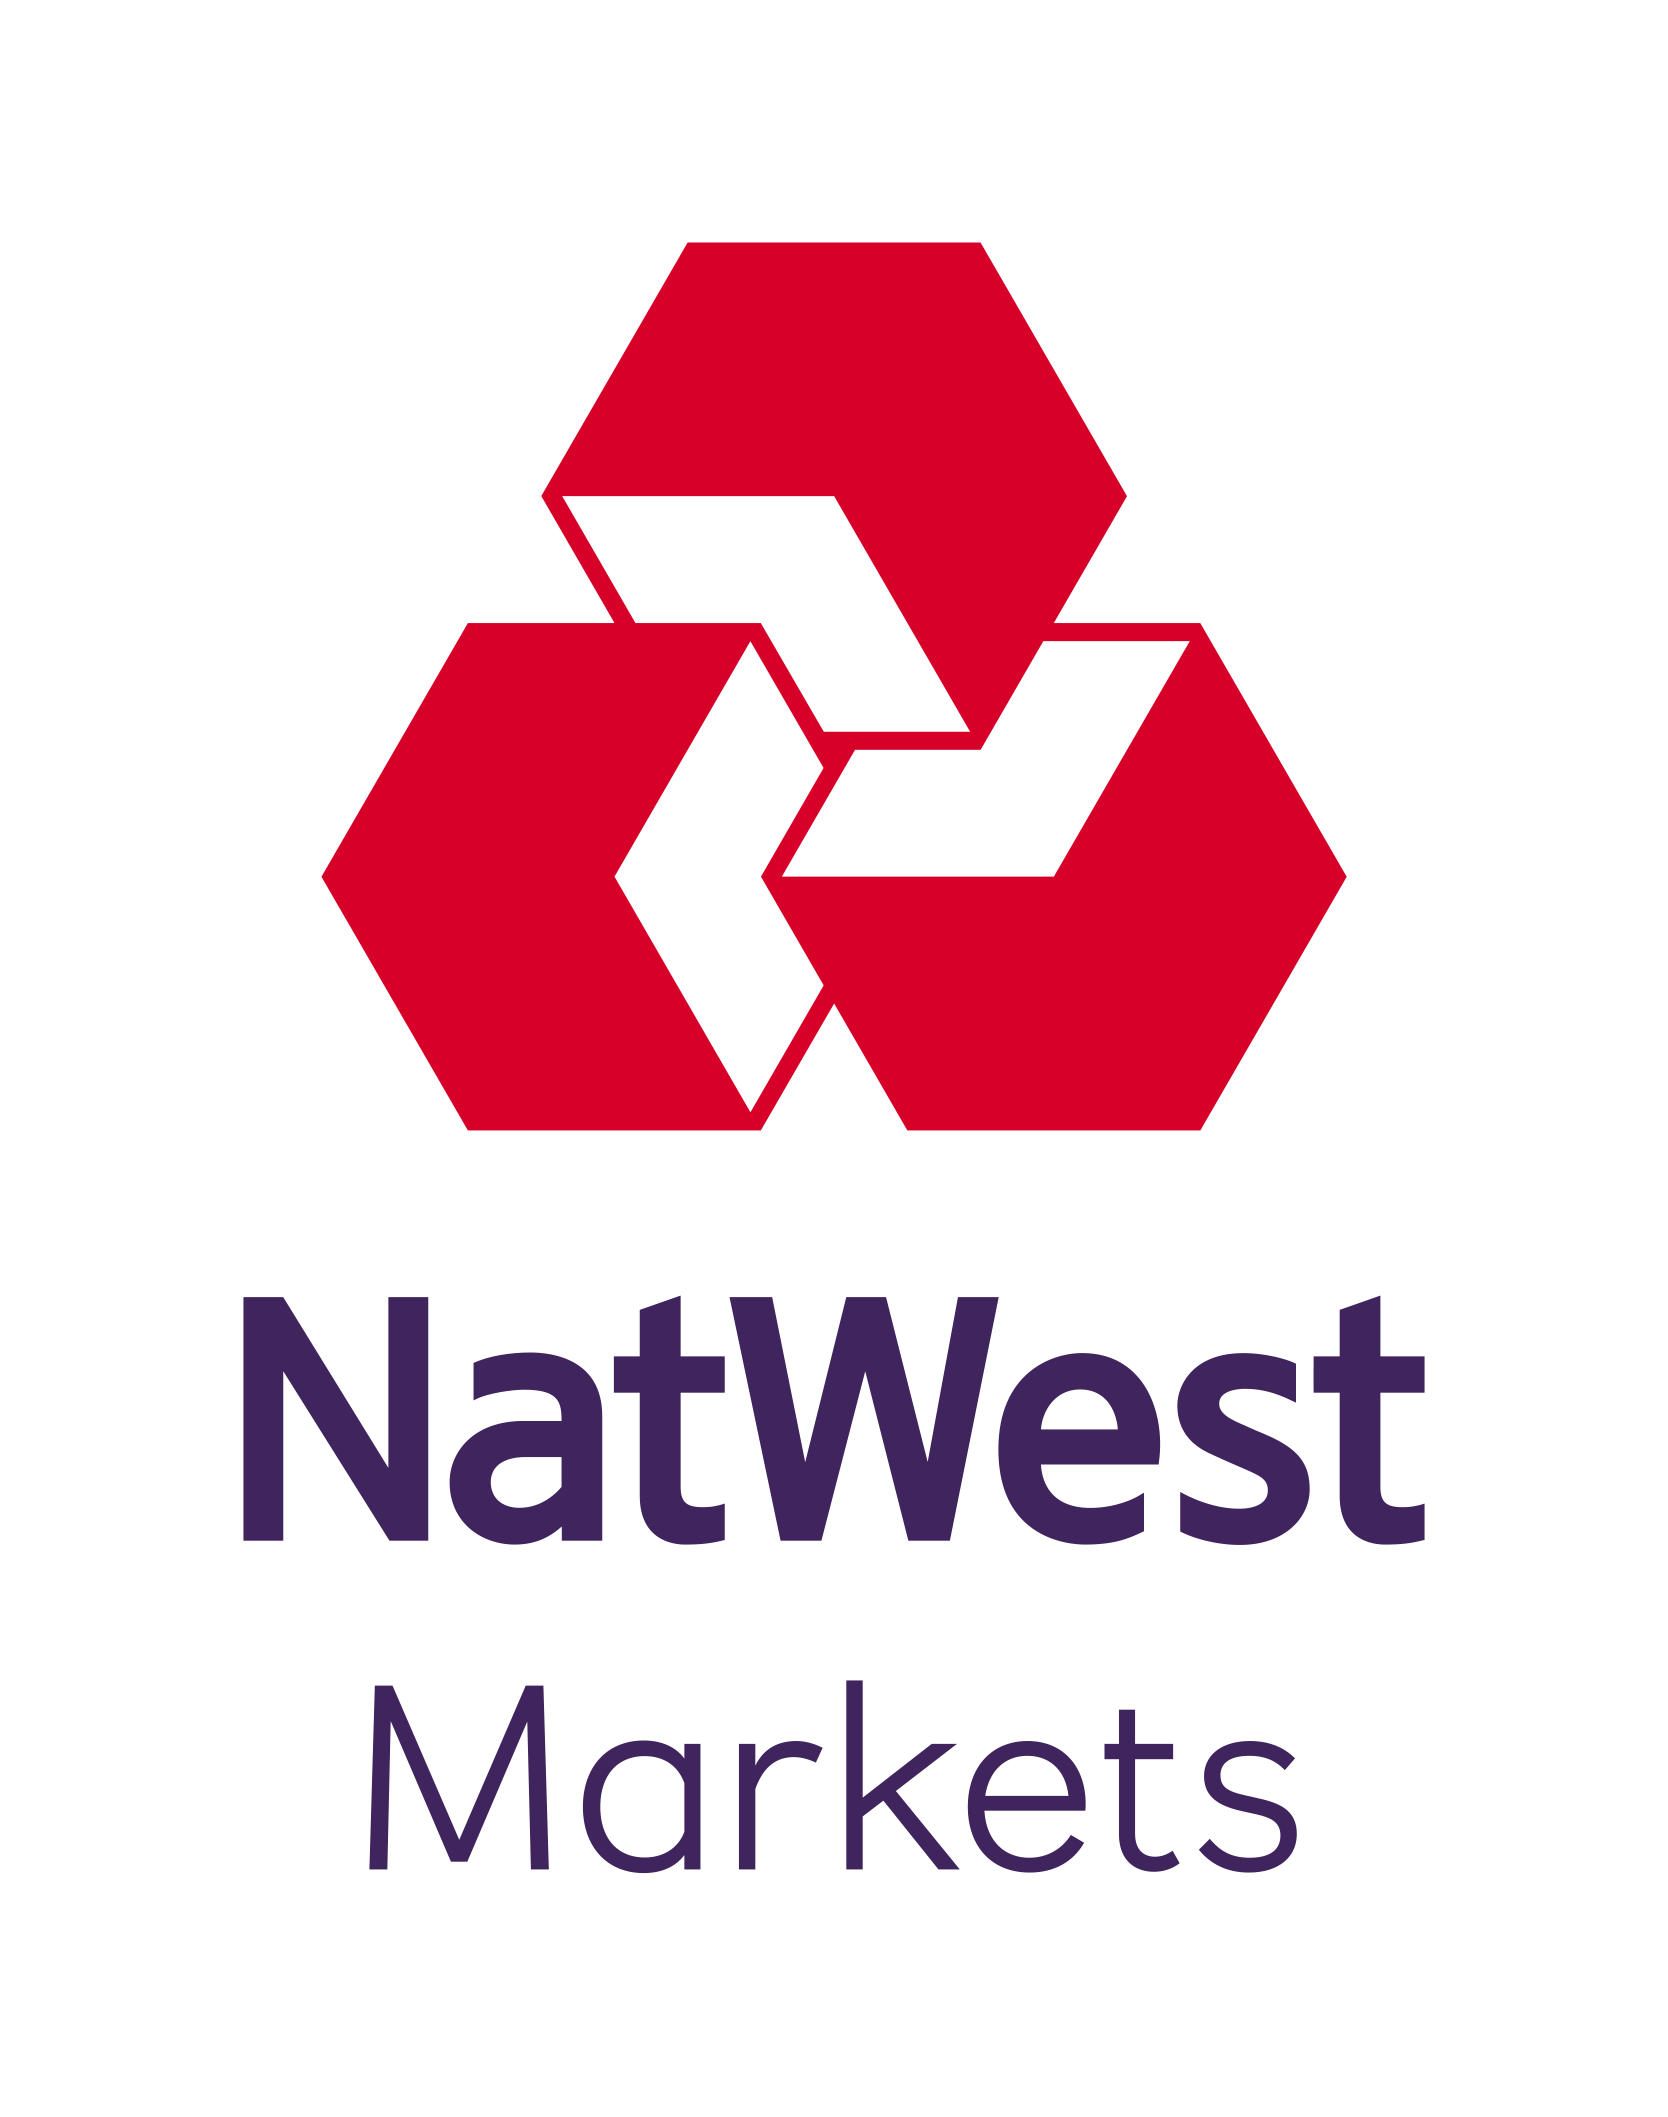 Games Island 2019 Text Logo Natwest PNG Image